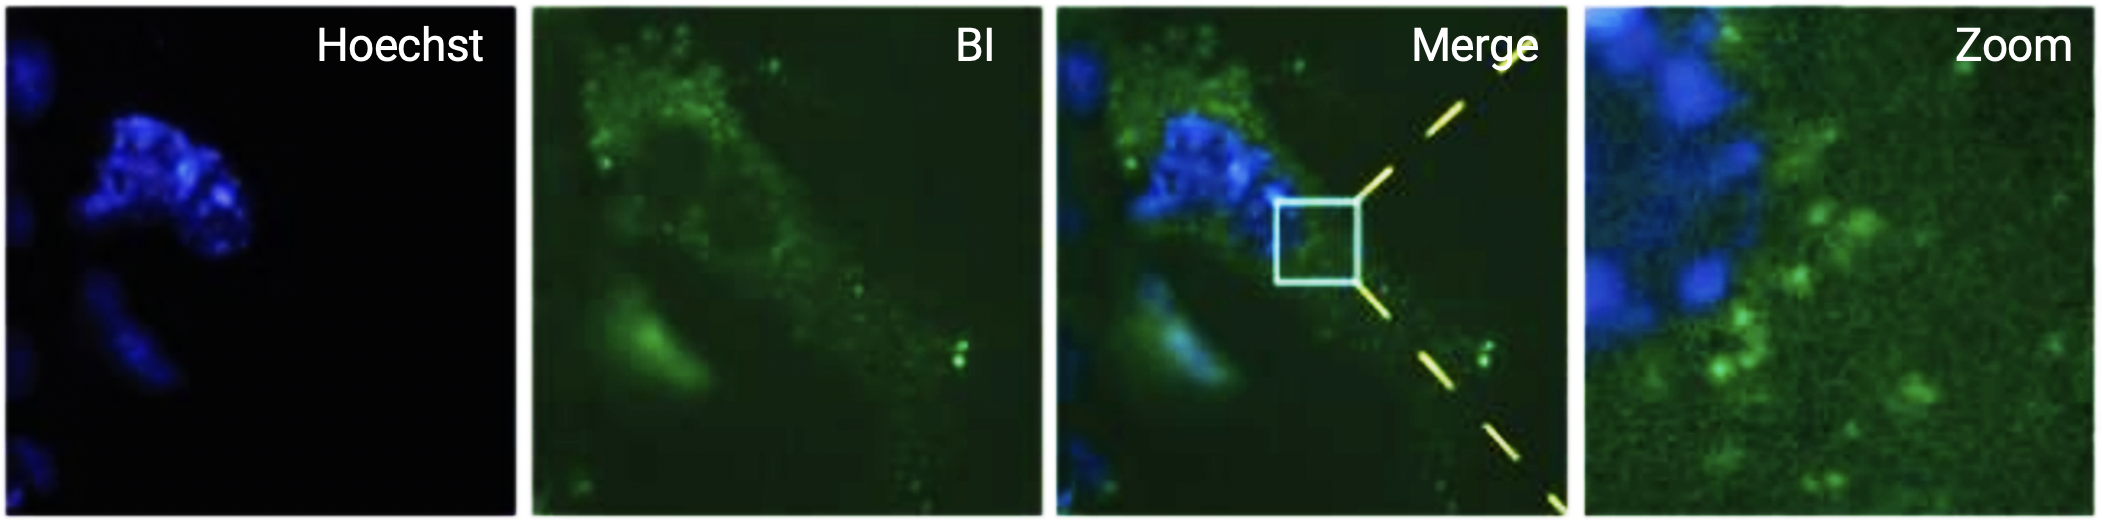 Live-cell imaging of Broccoli-expressing cells treated with BI